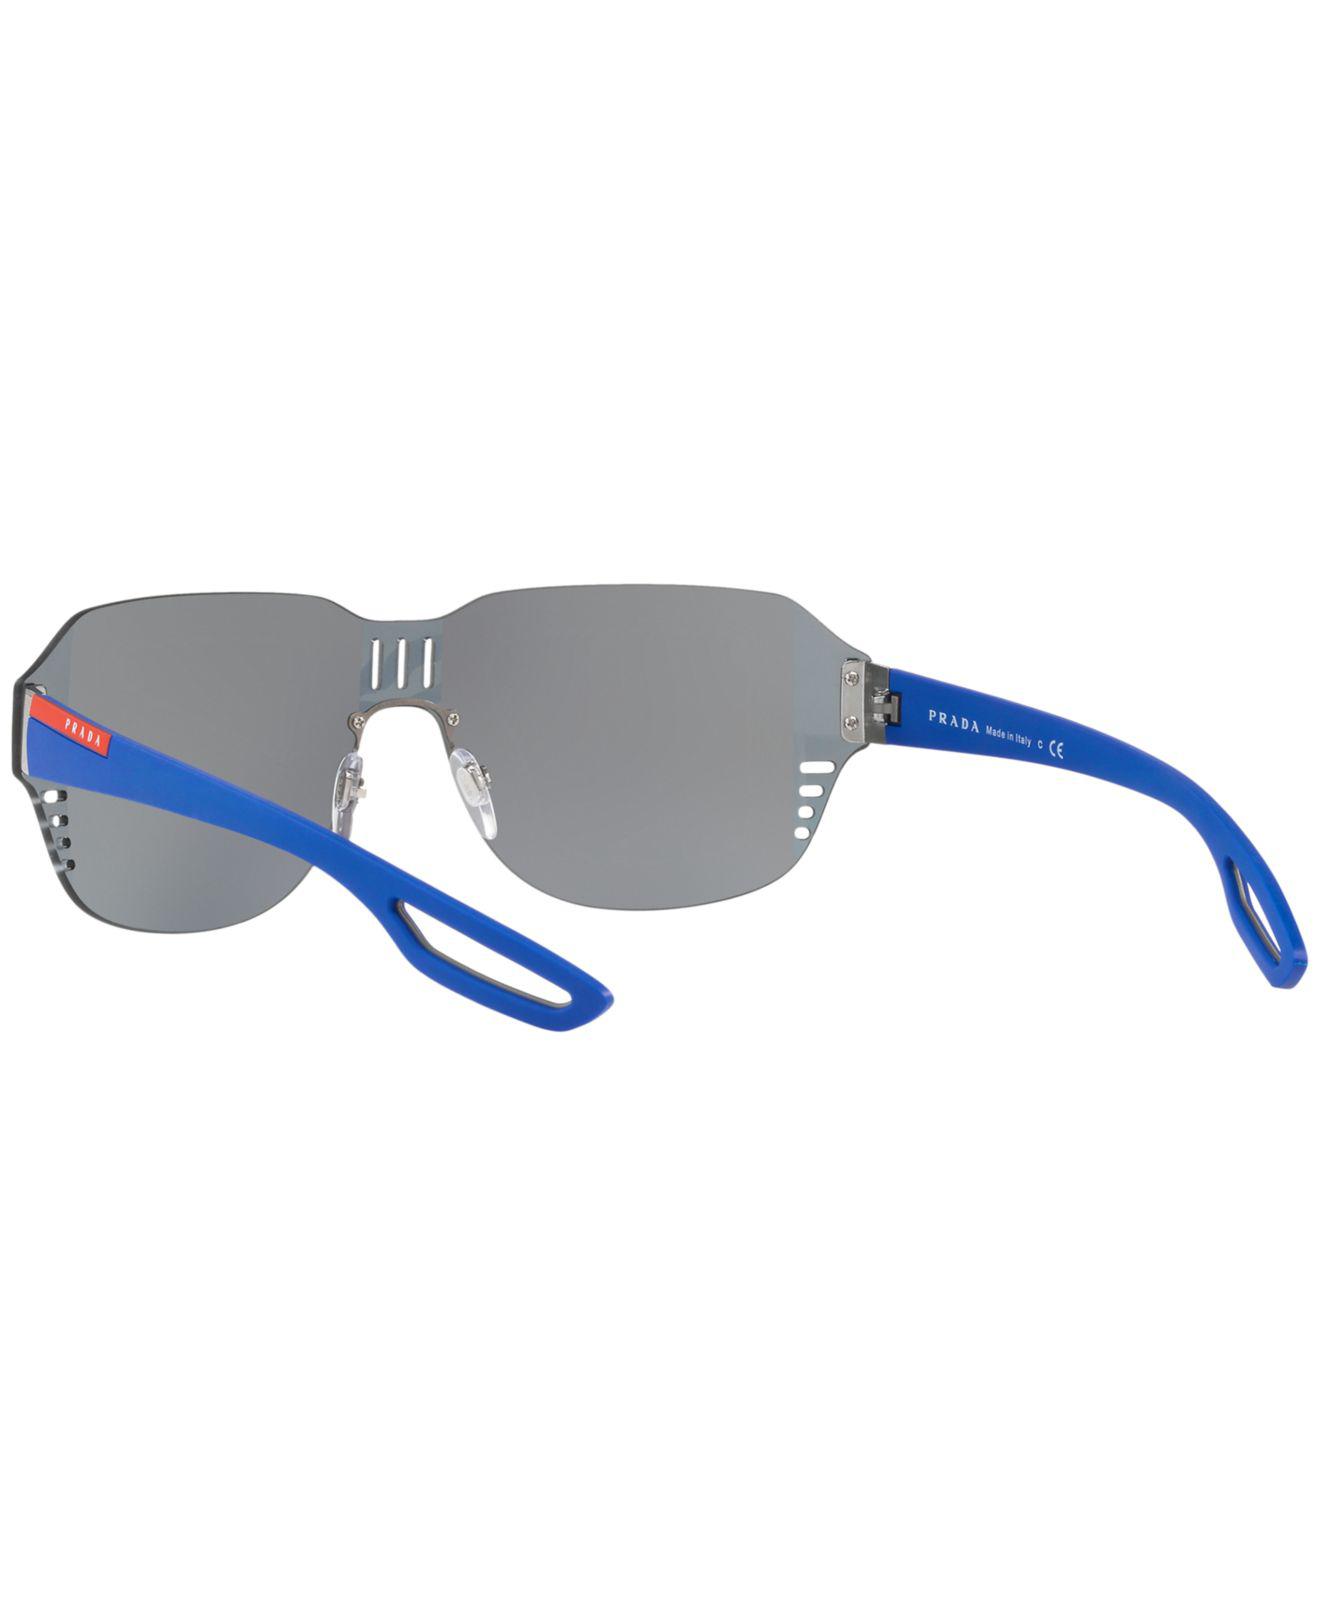 Prada Synthetic Sunglasses, Ps 05ss in Blue for Men - Lyst